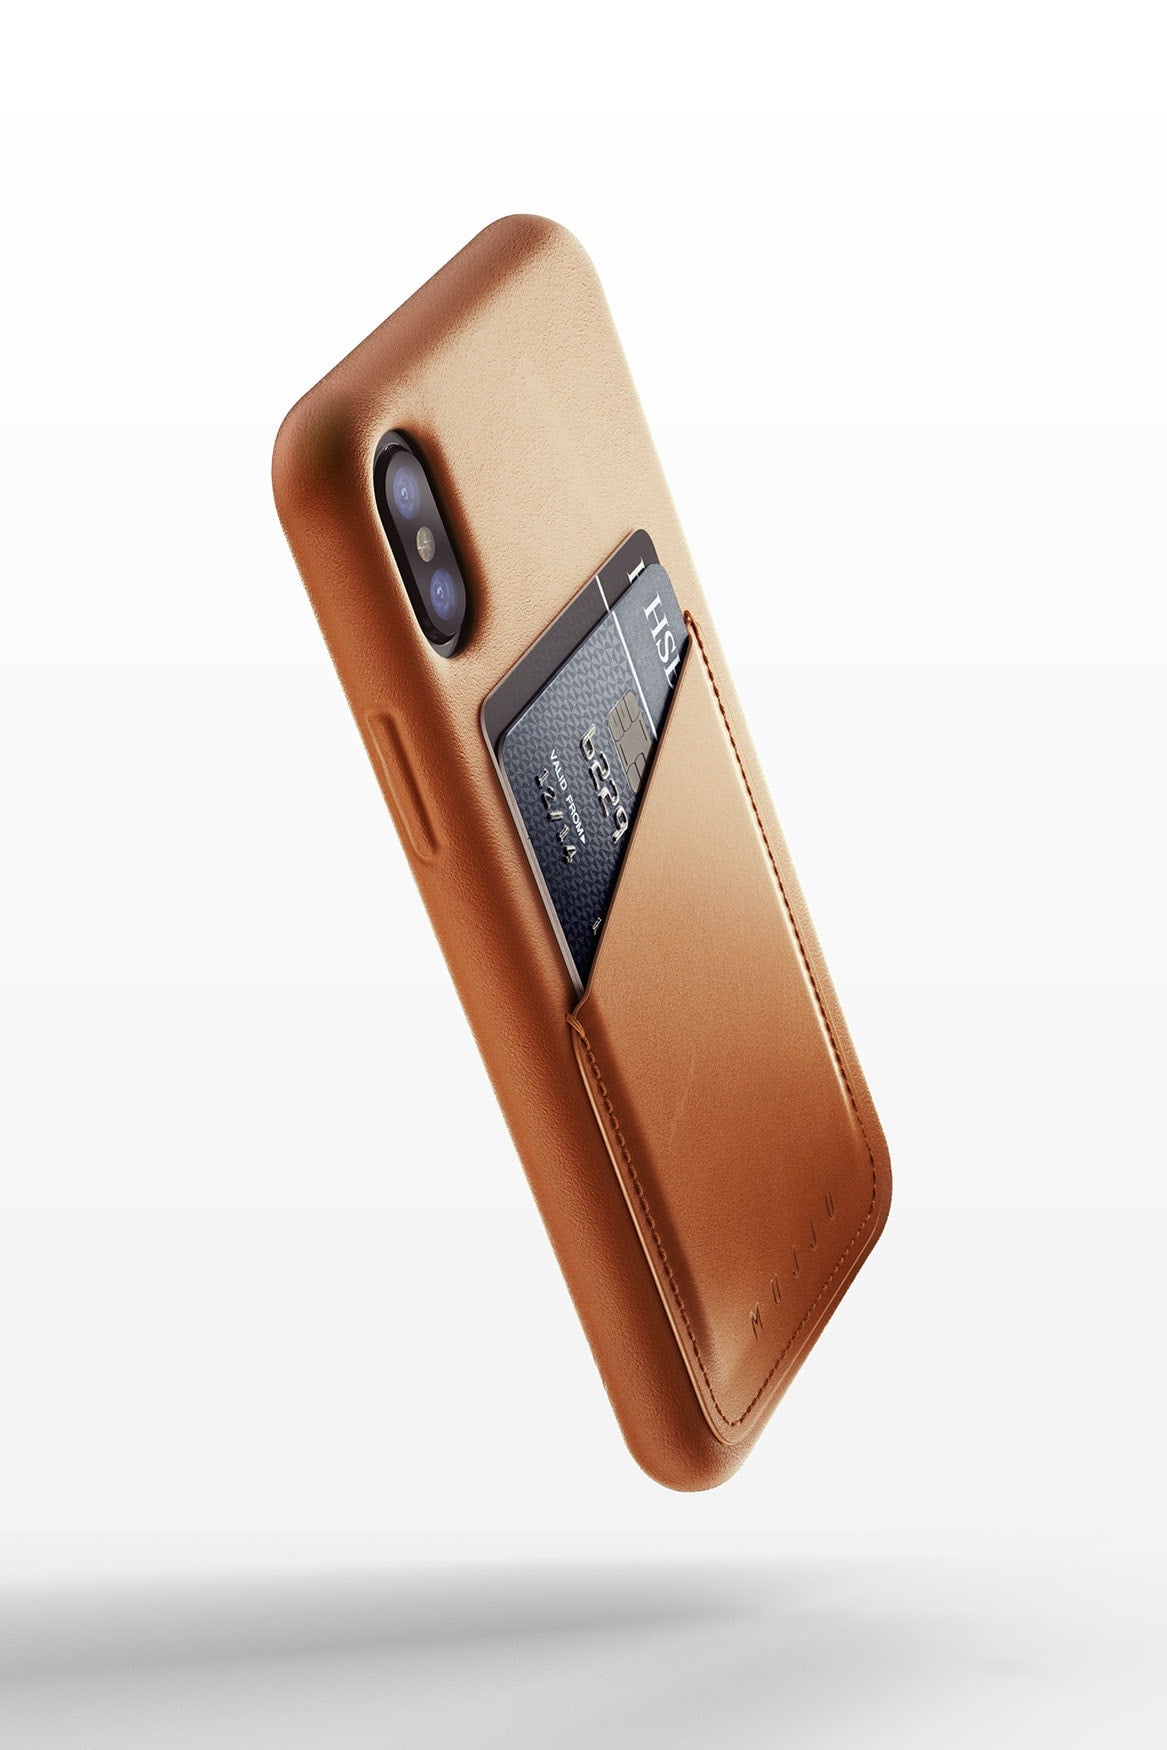 Full leather wallet case for iPhone X Tan 01